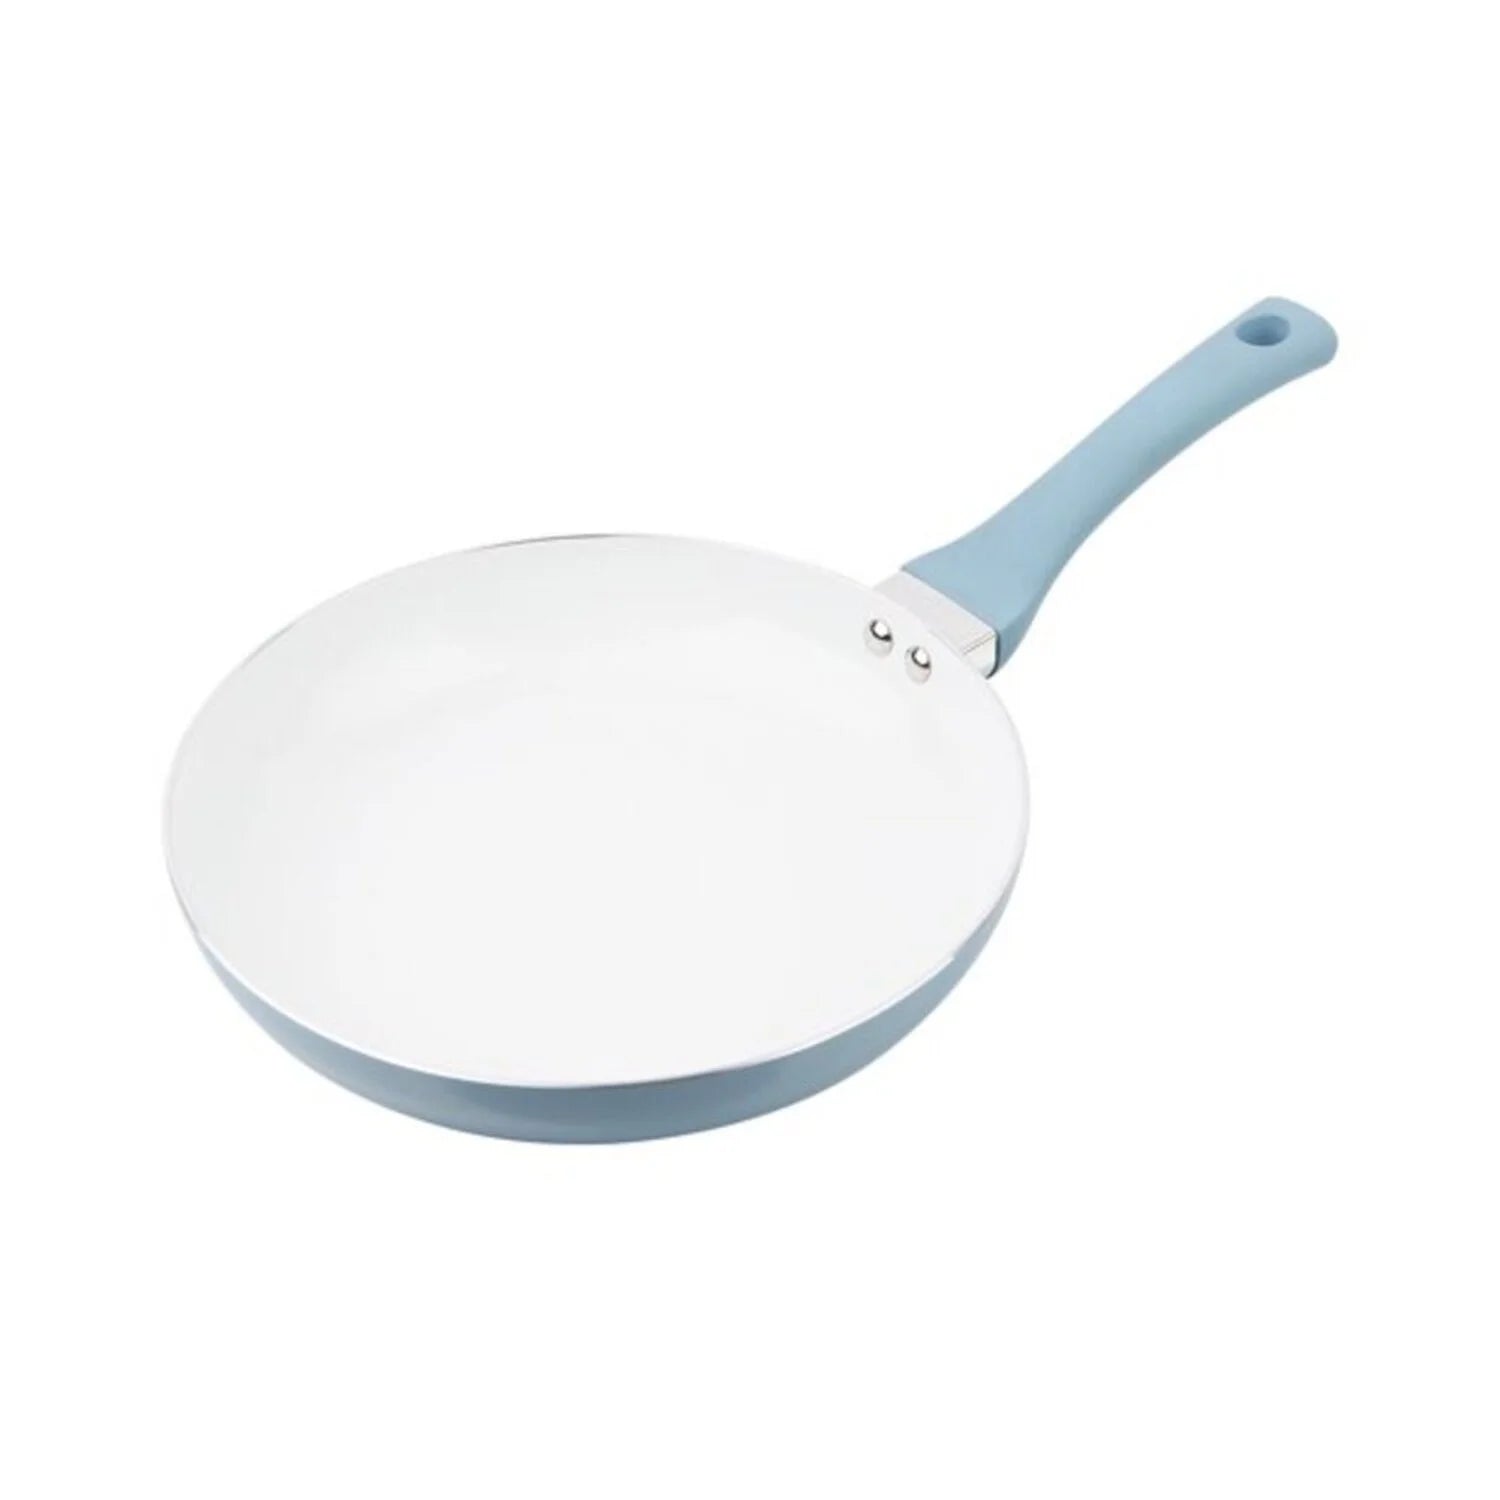 Wholesale prices with free shipping all over United States Mainstays Non-Stick Ceramic-Coated Aluminum Alloy 12in Frying Pan Blue Linen - Steven Deals